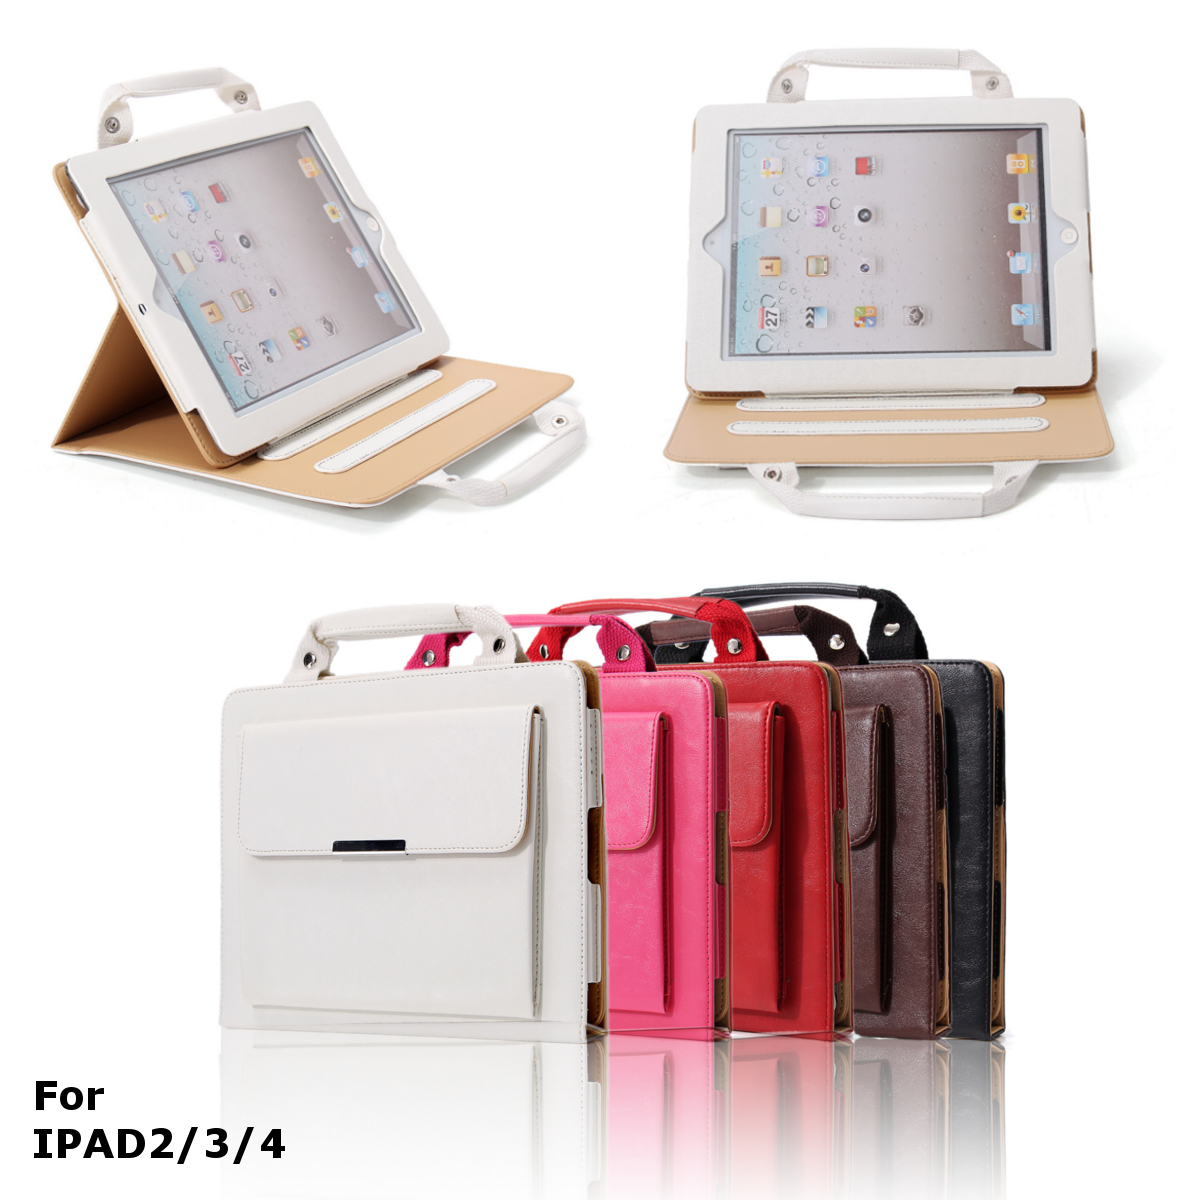 PU-Leather-Stand-Case-with-Handle-amp-Storage-Compartment-for-iPad-2-3-4---Perfect-for-Travel-1141745